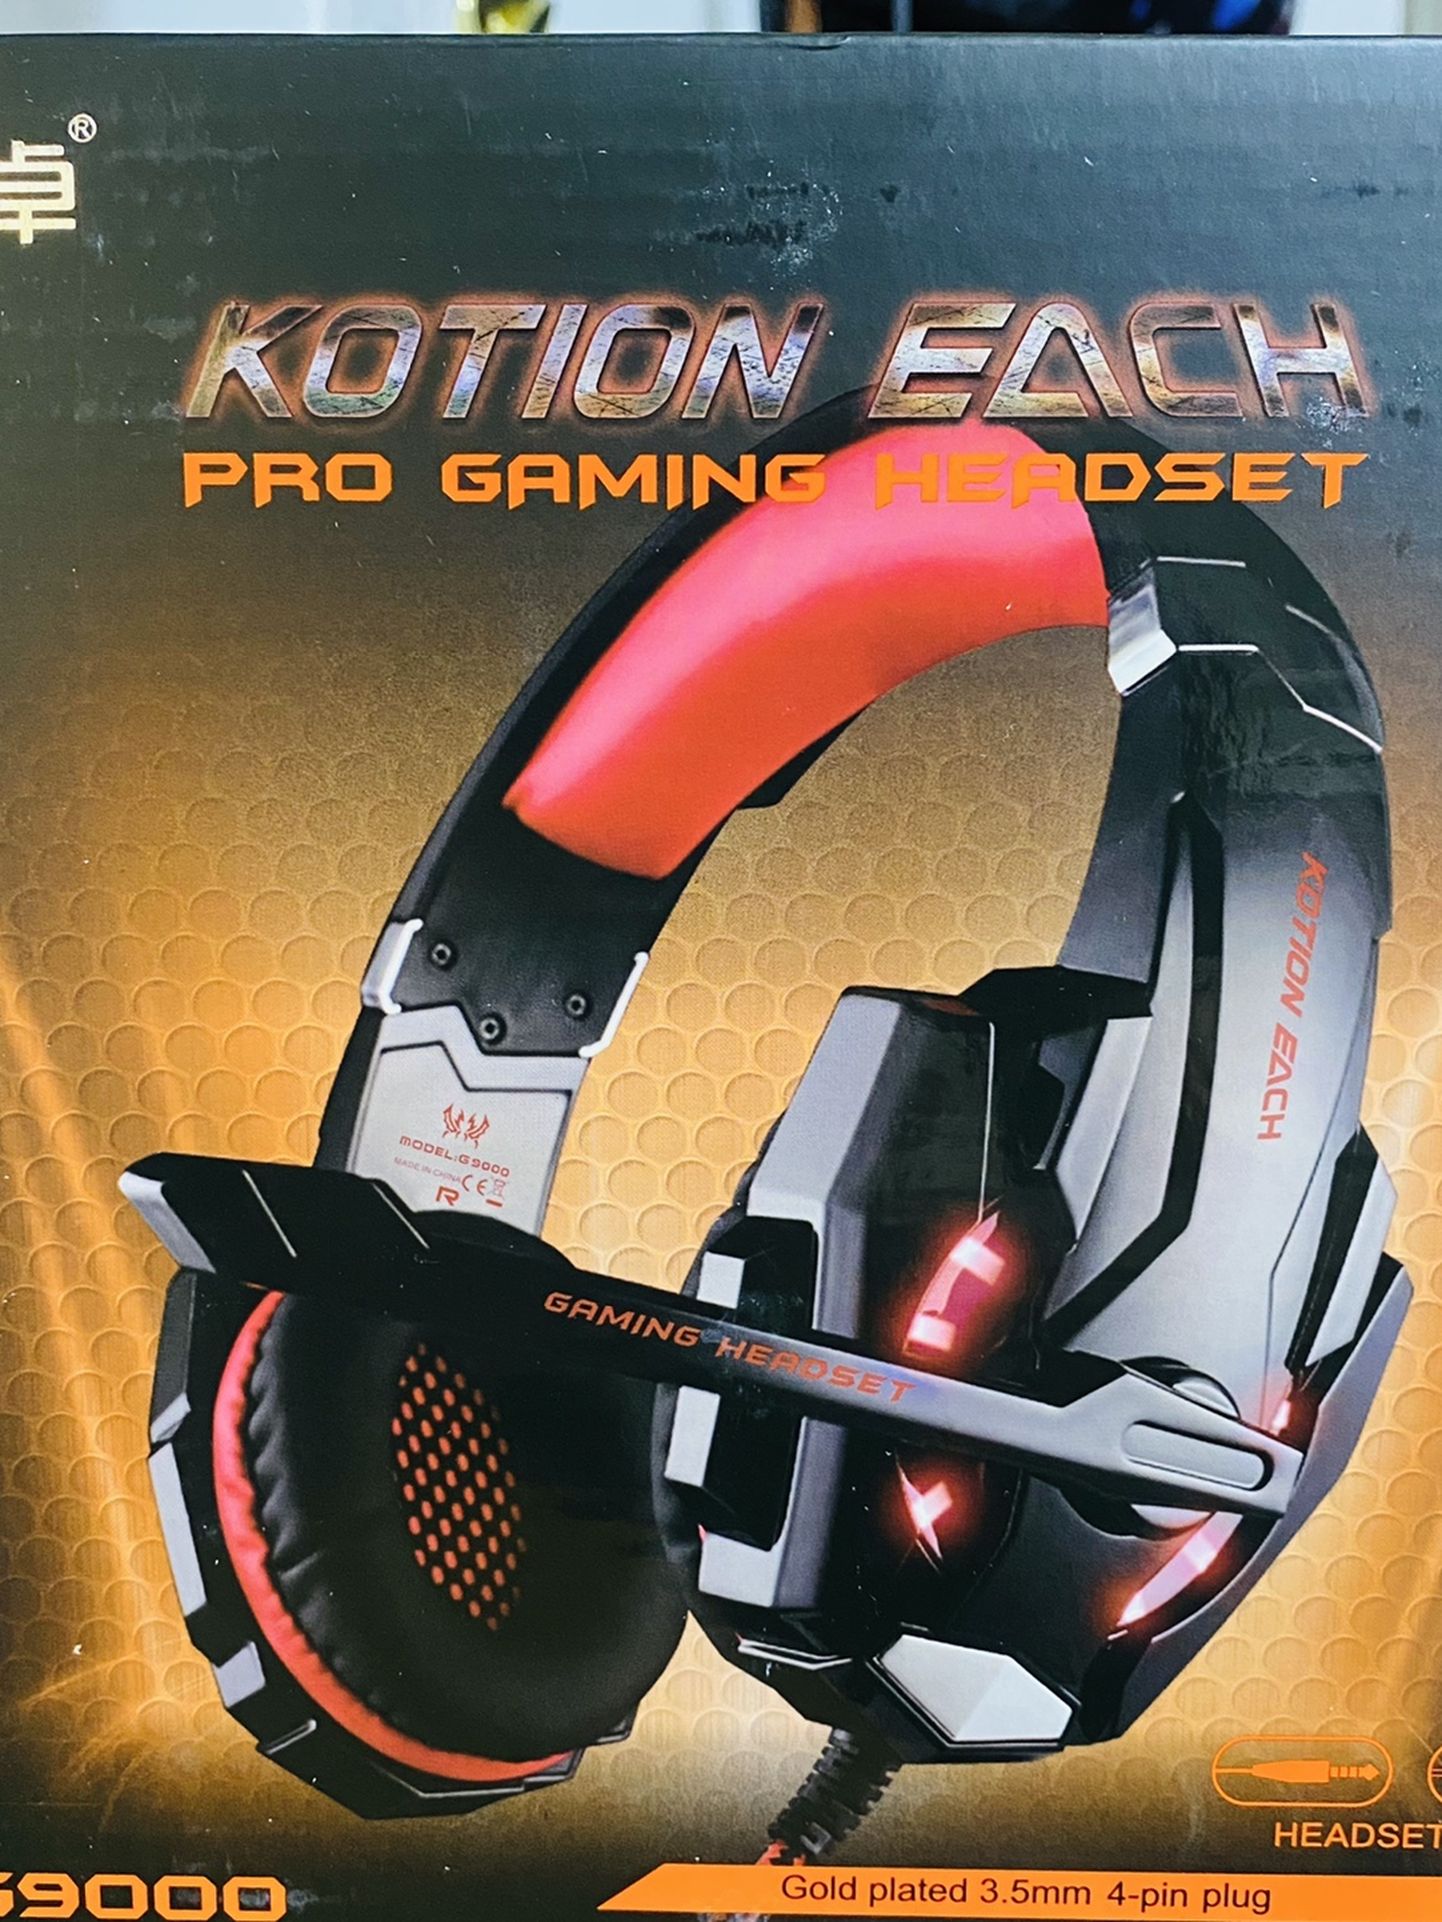 KOTION EACH Pro Gaming Headset G9000 Gold plated 3.5mm 4-pin plug